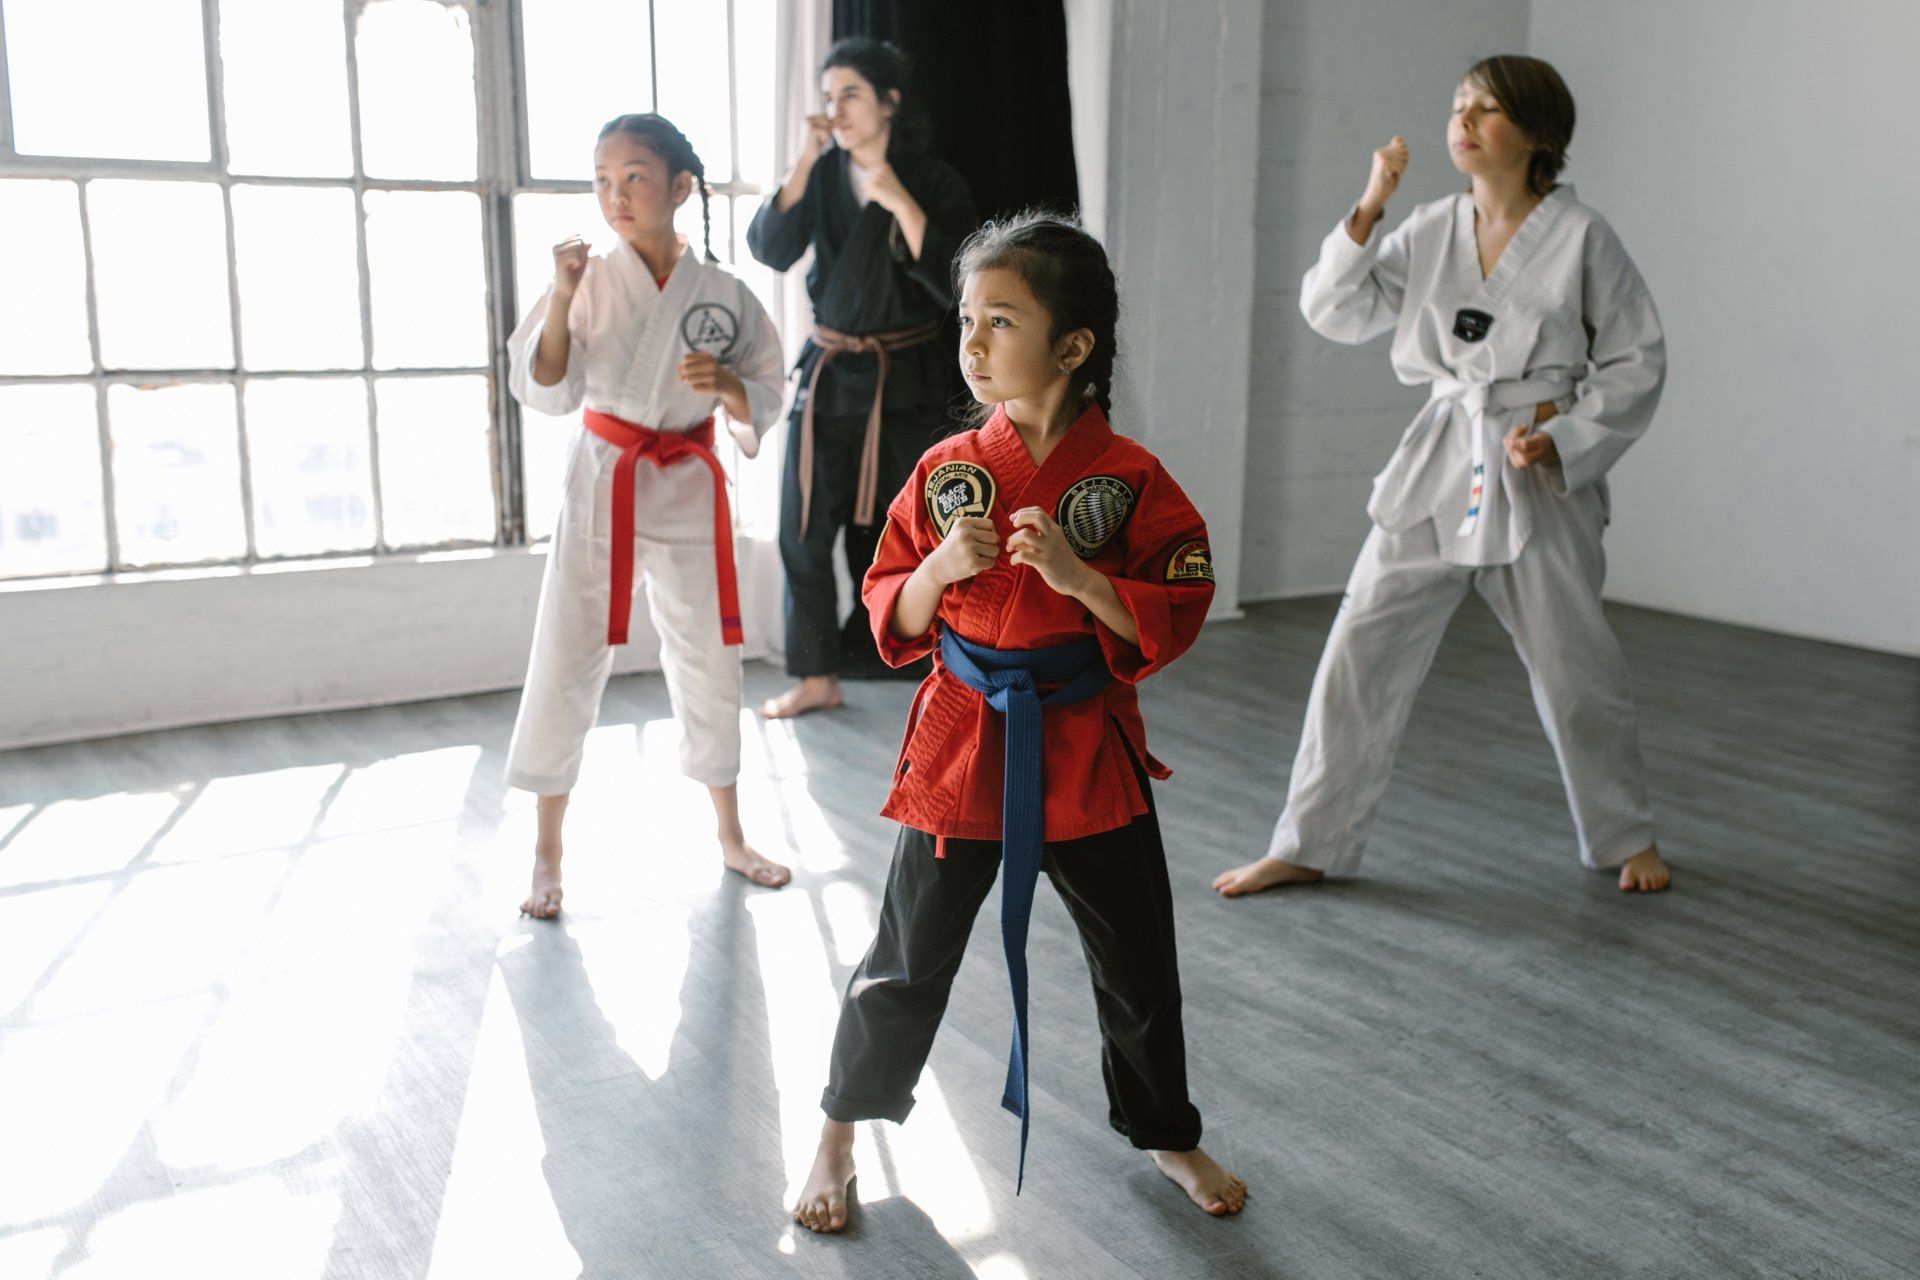 A group of young girls are practicing karate in a gym.